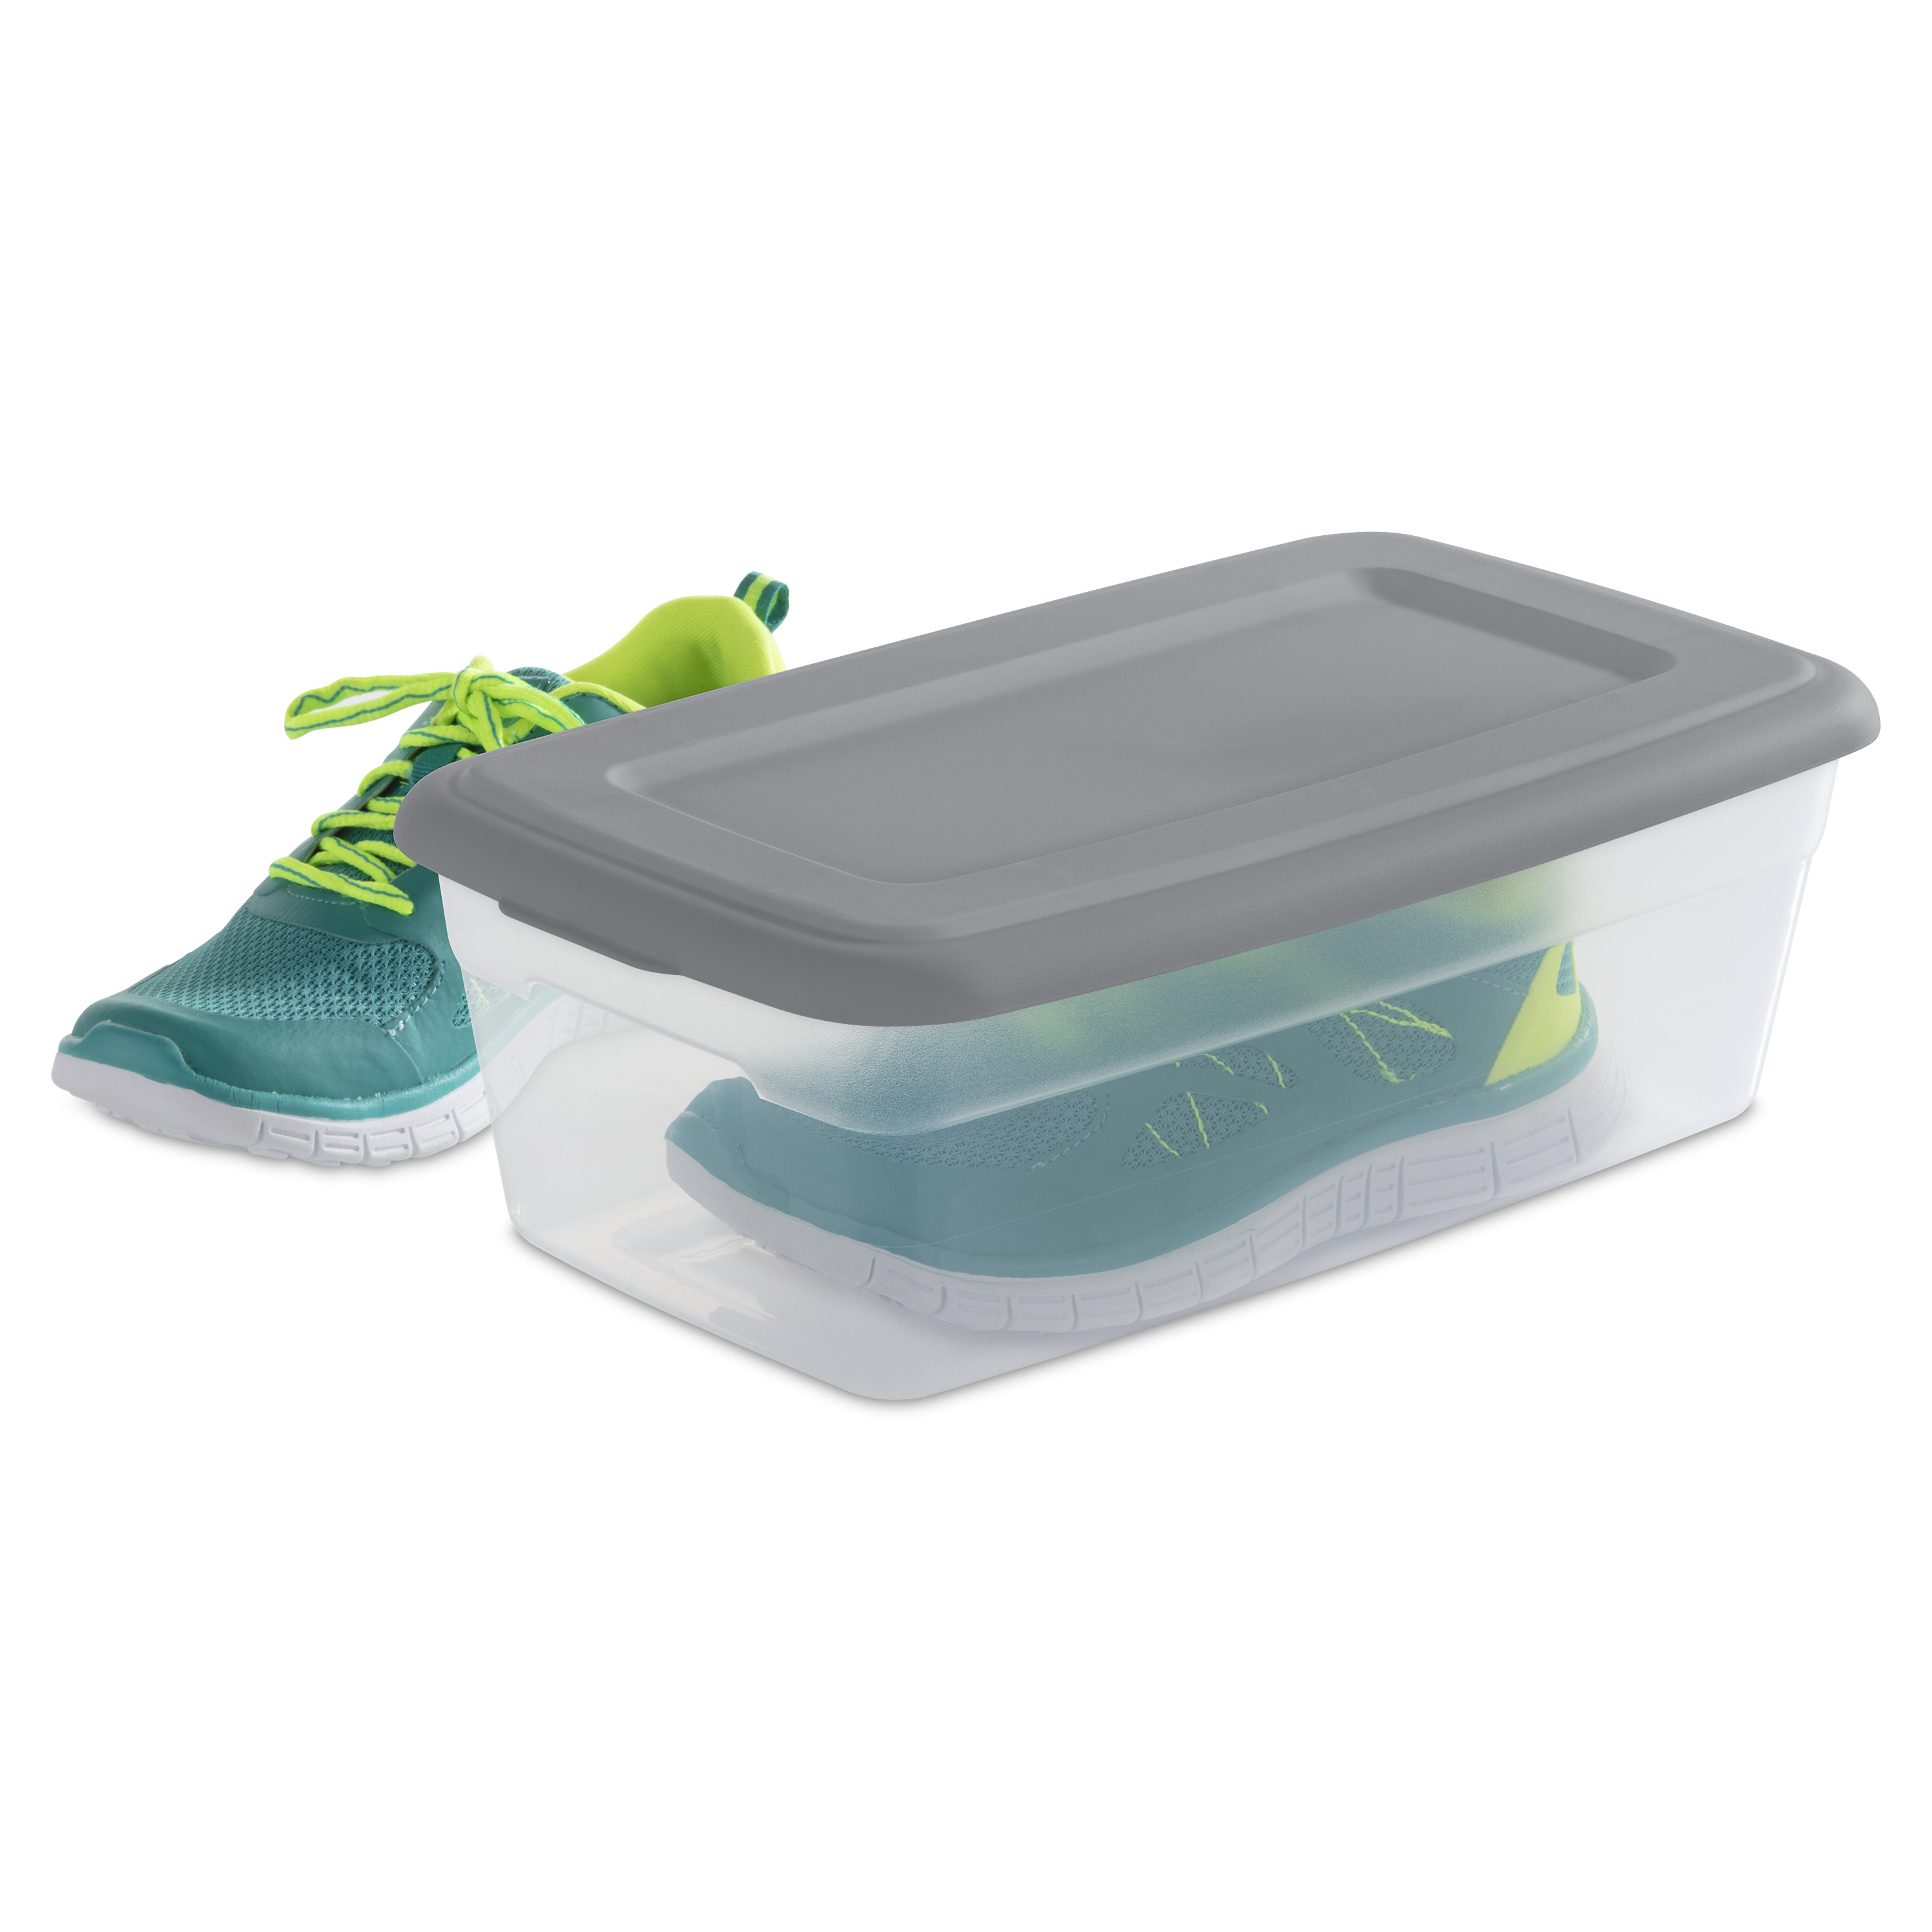 Sterilite Set of (10) 6 Qt. Clear Plastic Storage Boxes with Gray Lids - image 5 of 8